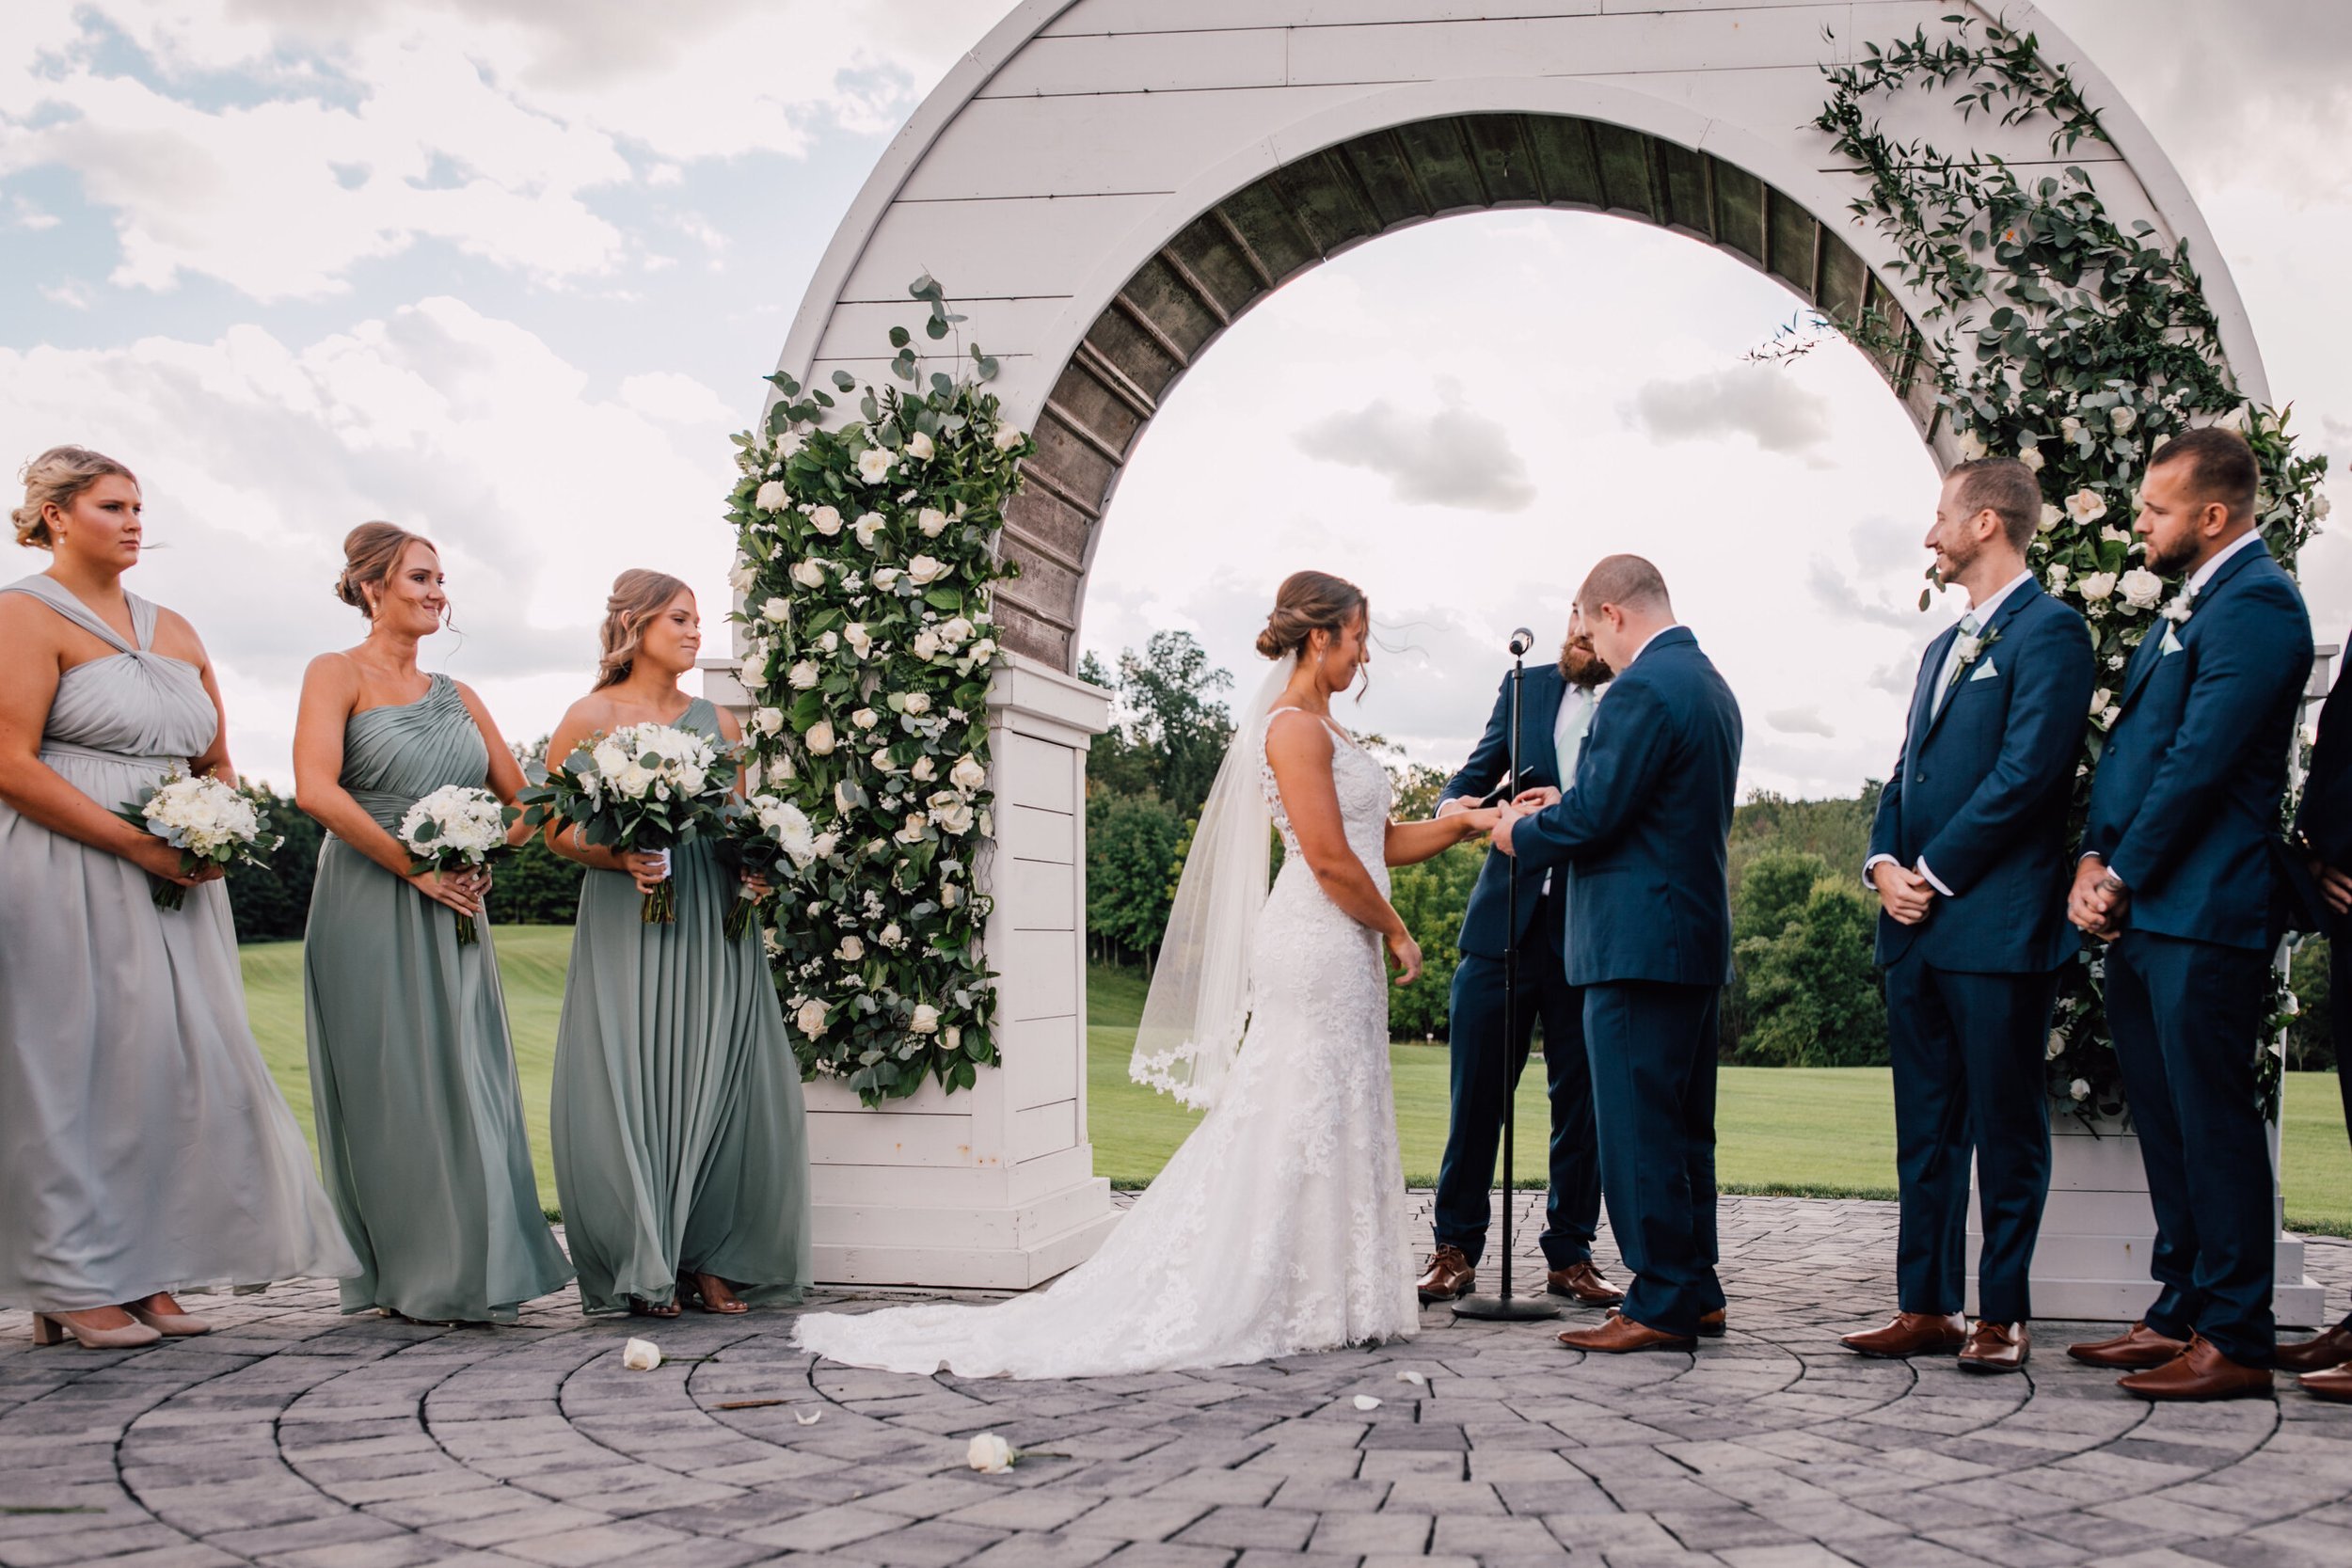  The groom places a ring on the brides finger under the wooden wedding arch 